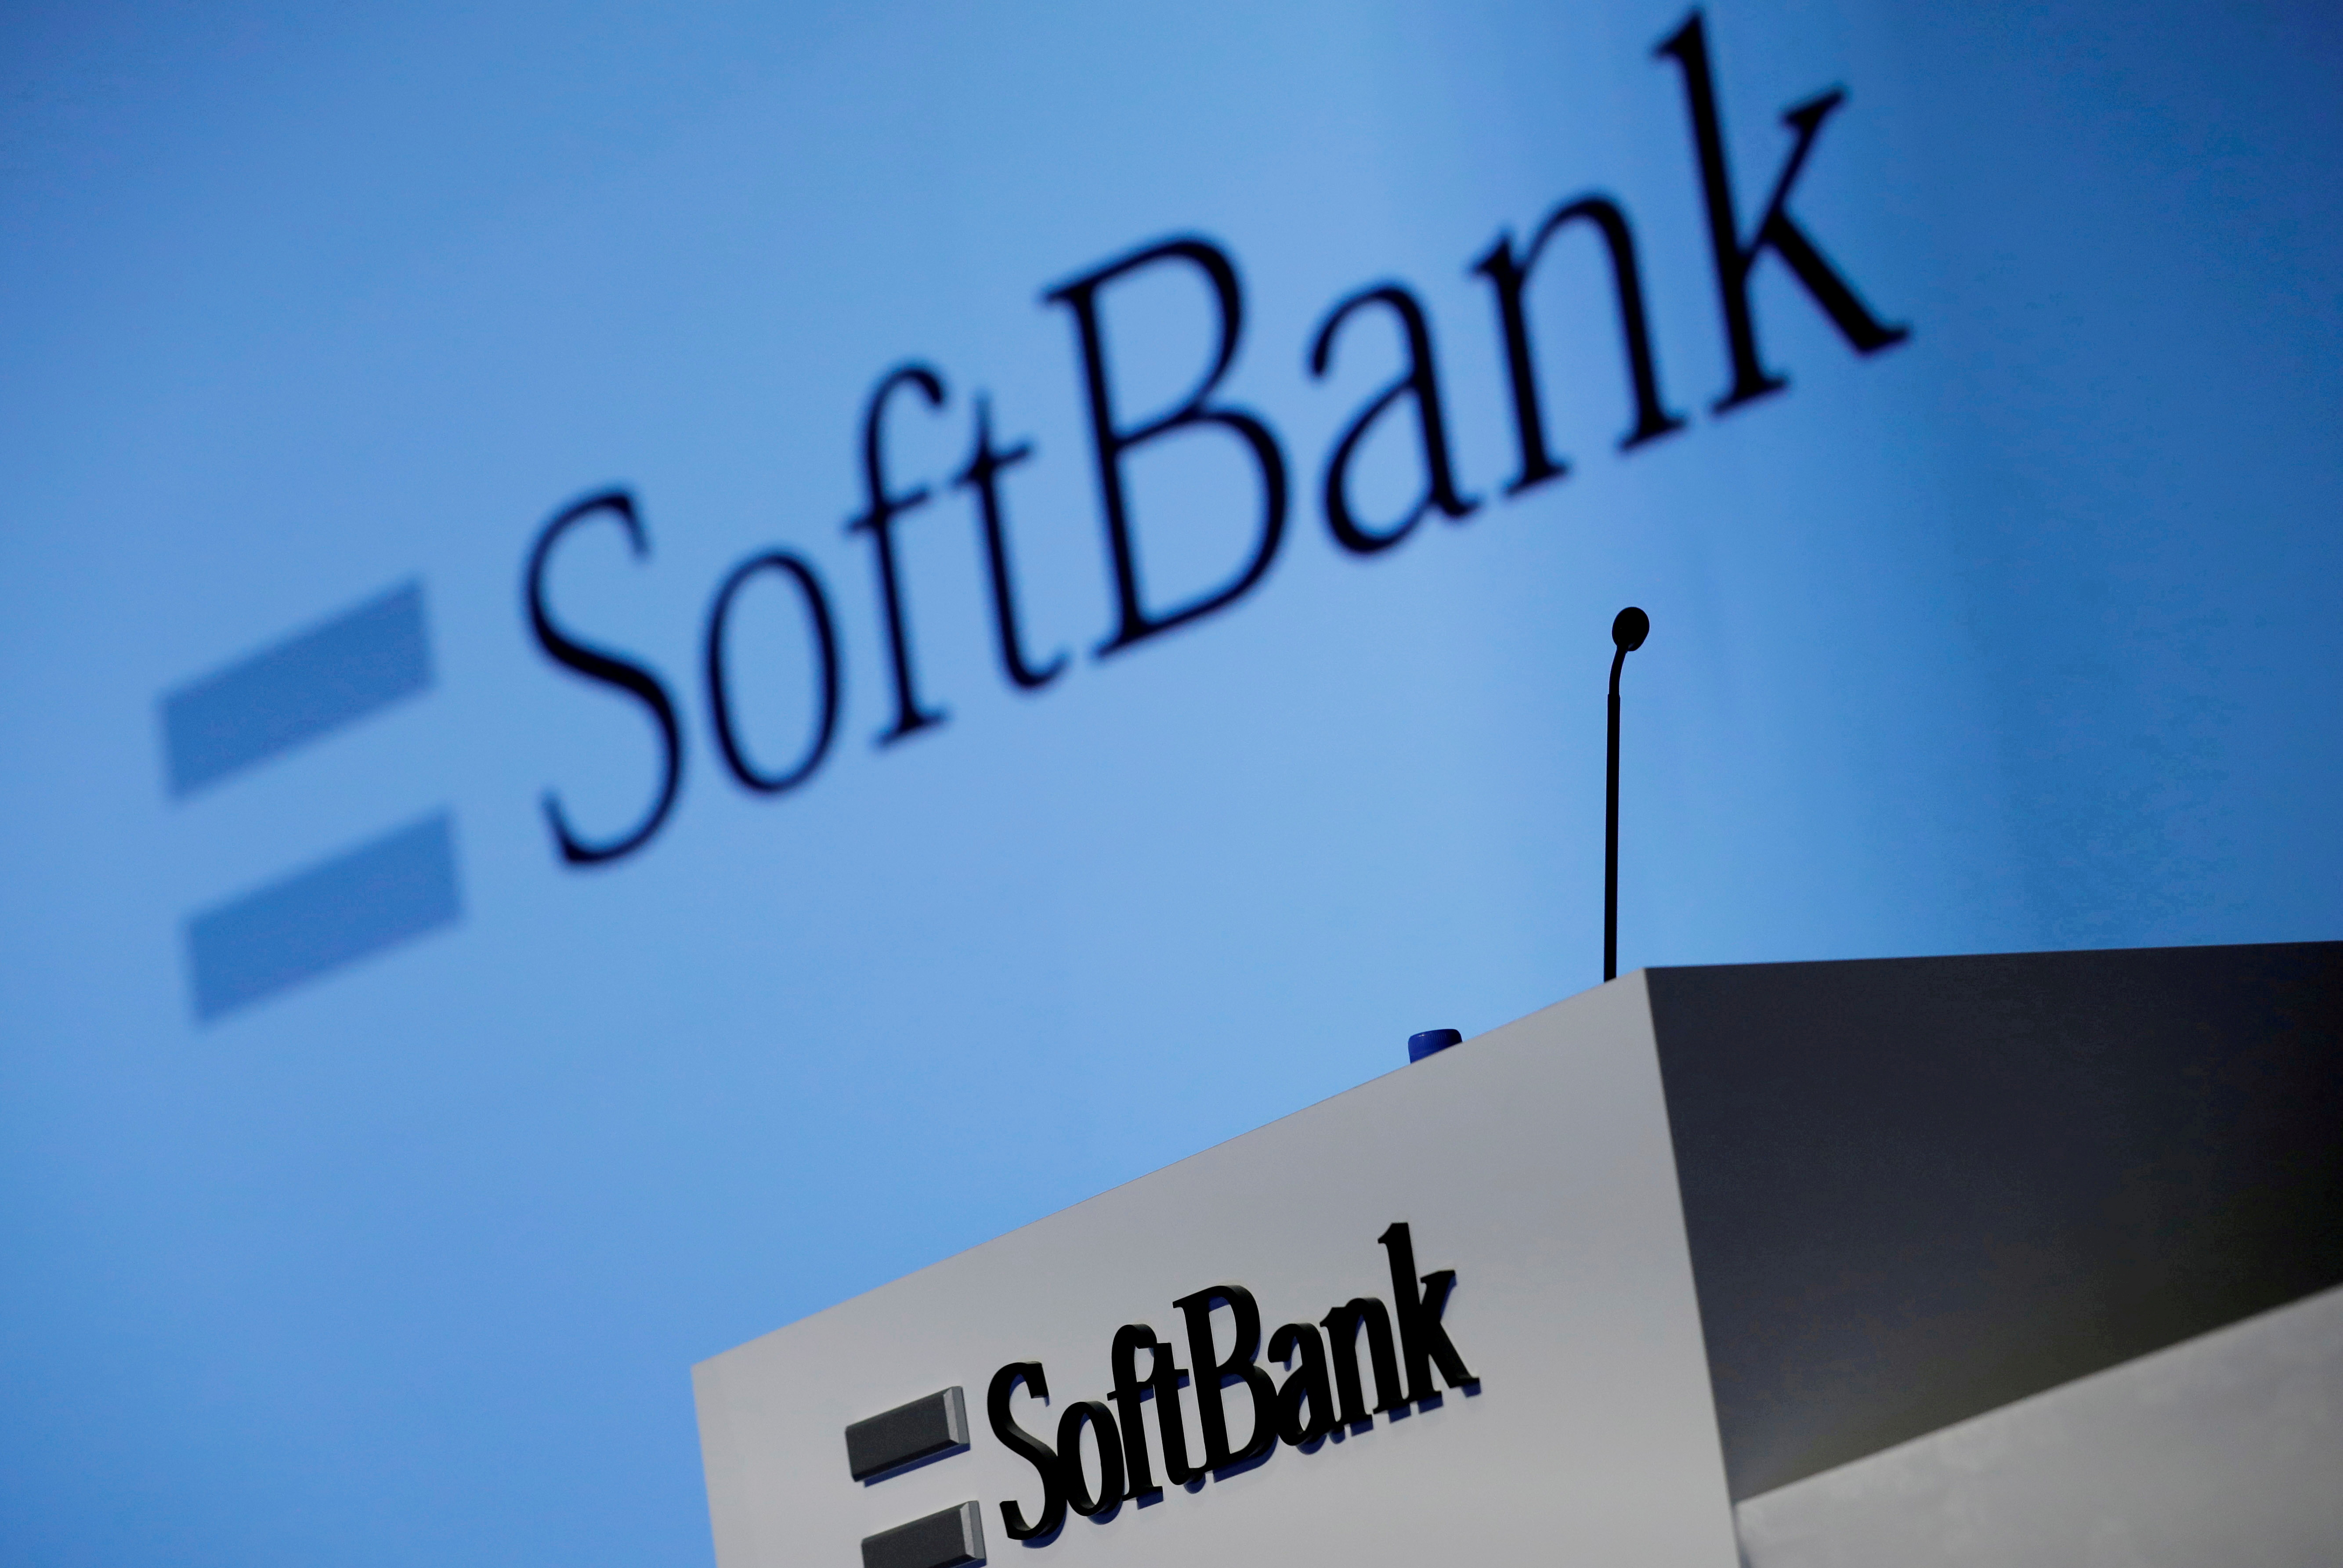 SoftBank's logo is pictured at a news conference in Tokyo